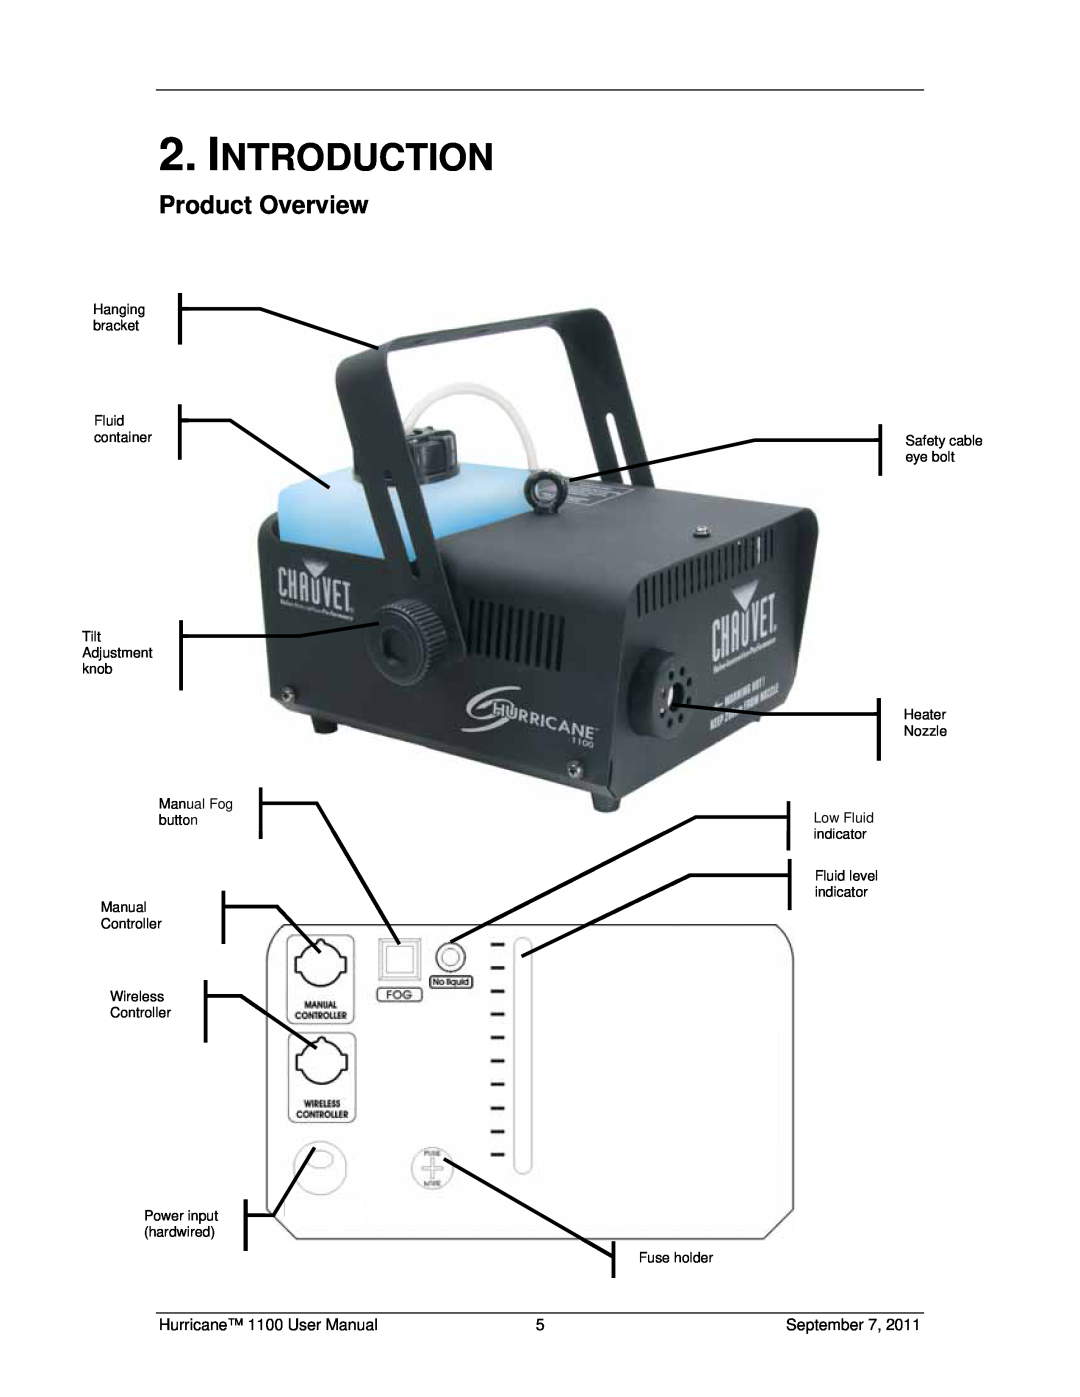 Chauvet 1100 Introduction, Product Overview, Hanging bracket Fluid container, Controller Wireless Controller, Fuse holder 